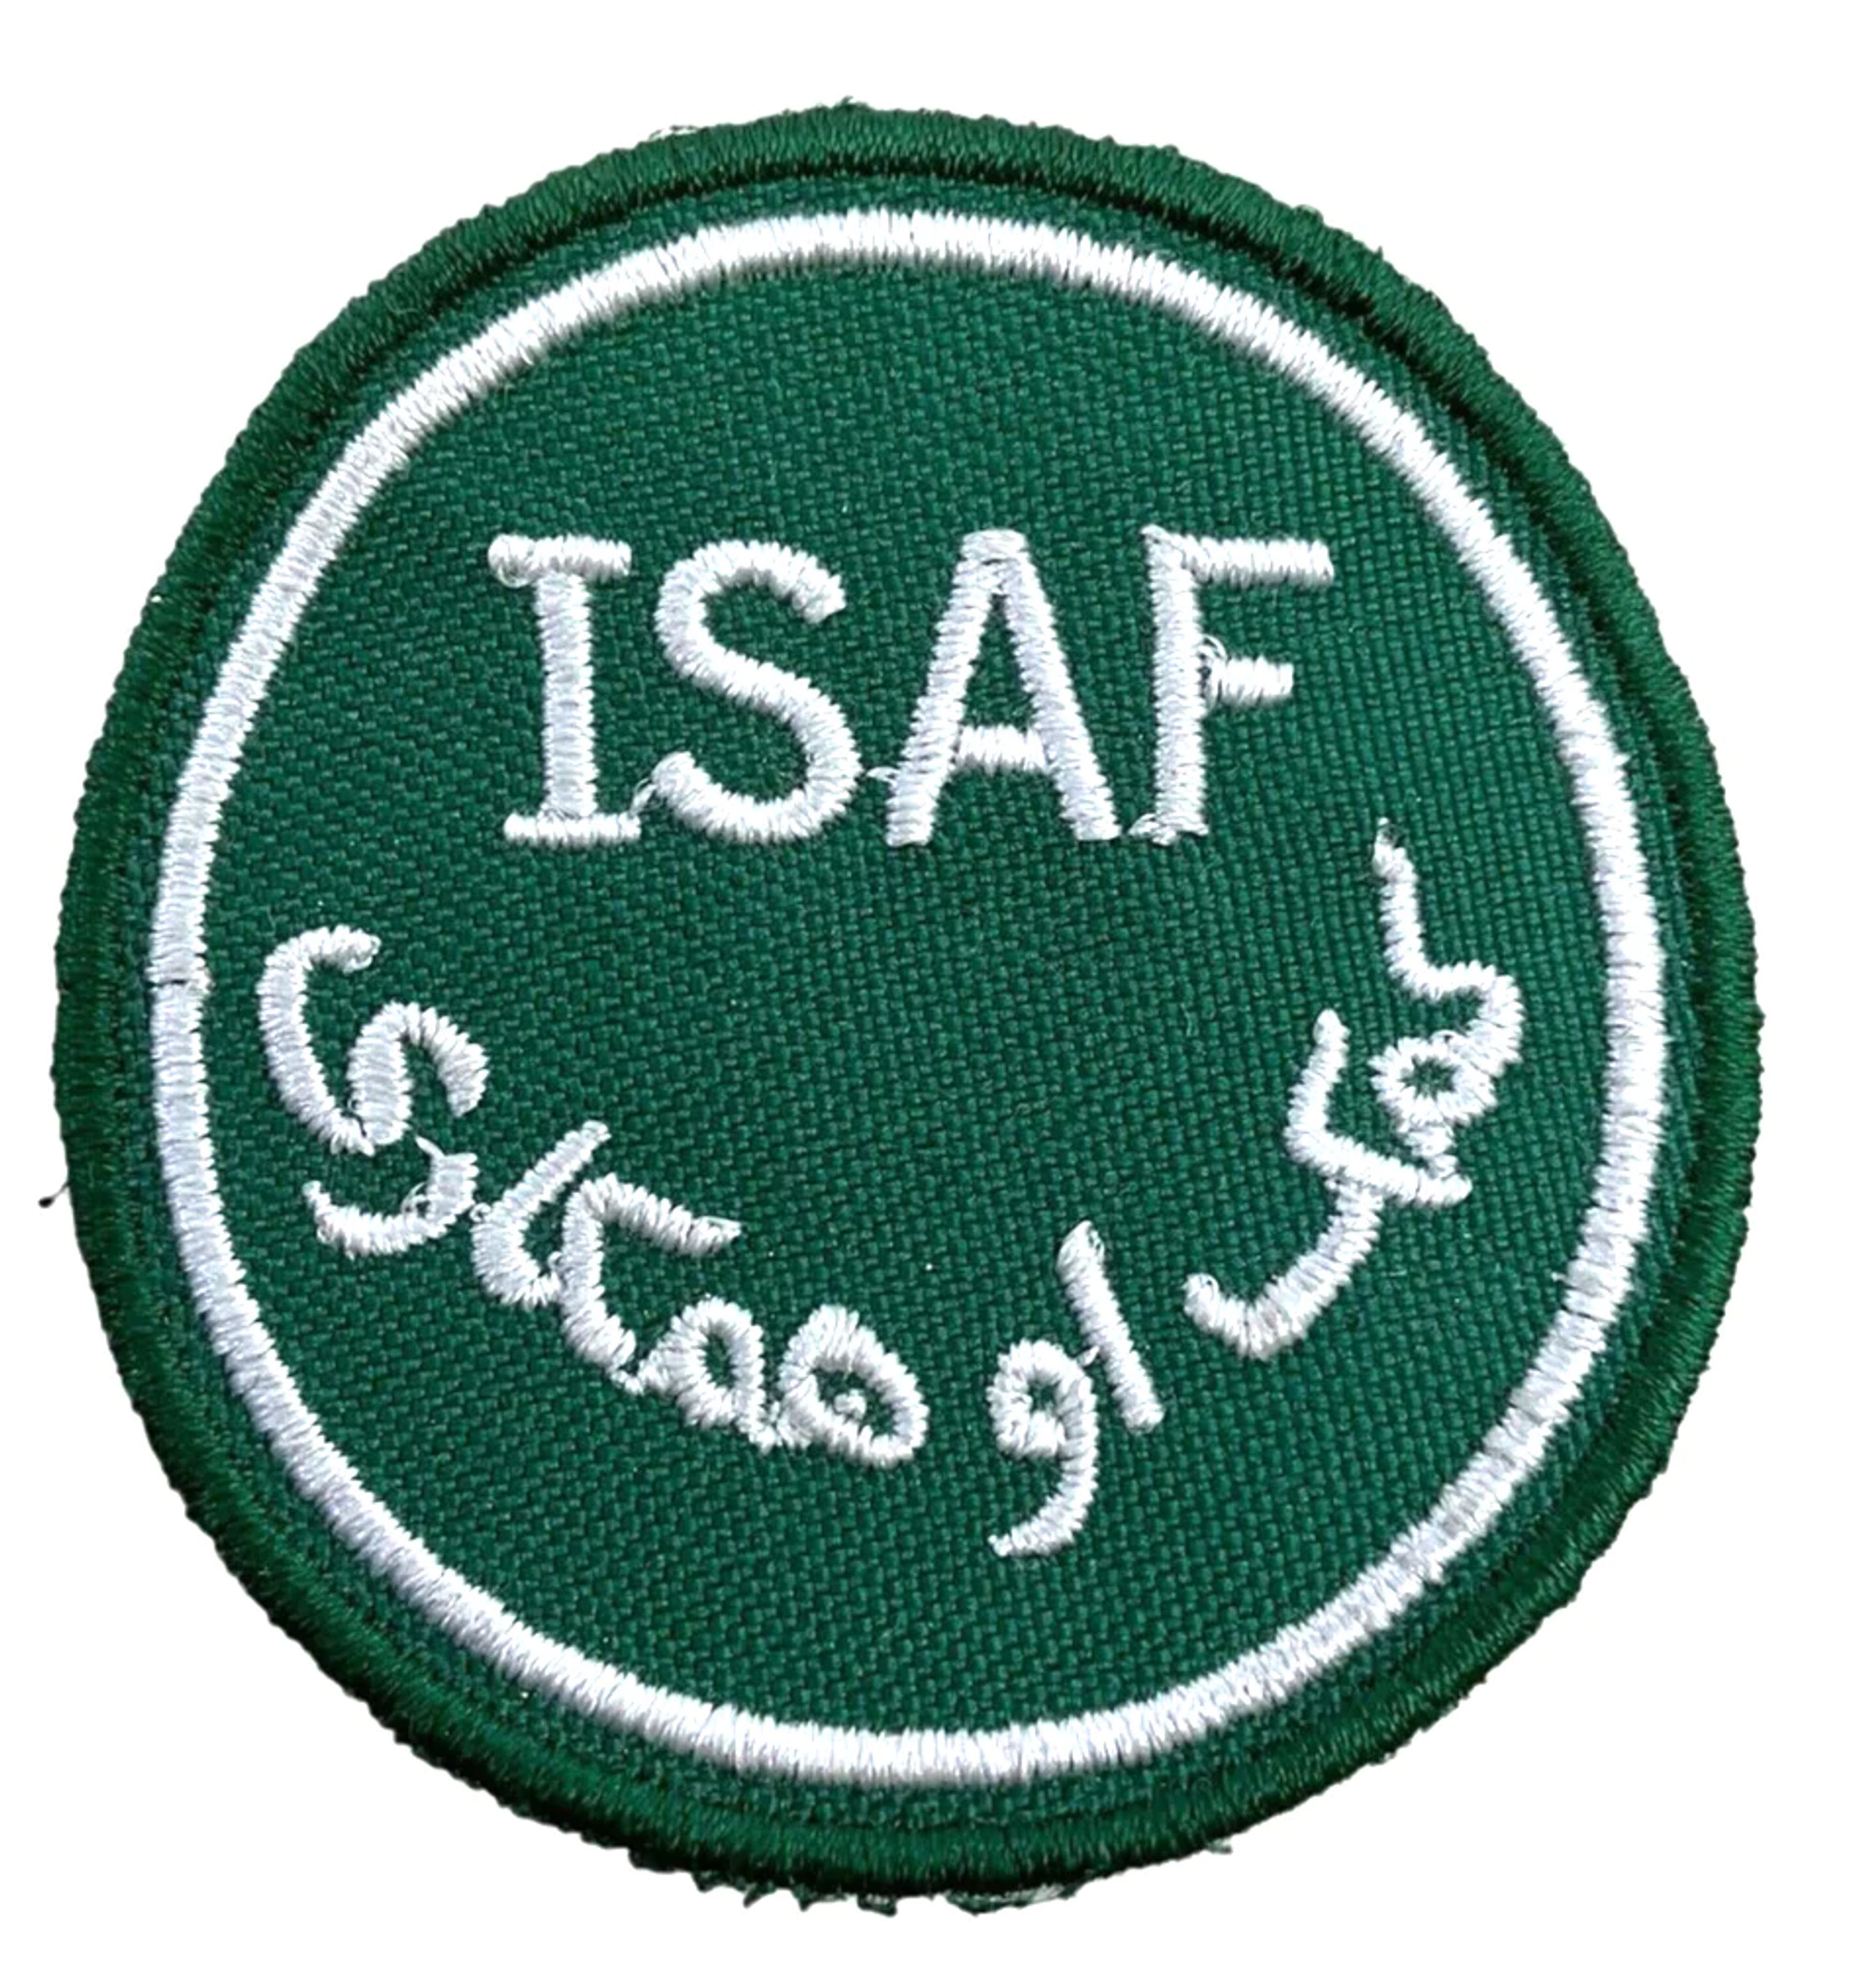 NATO ISAF Small Patch - Green